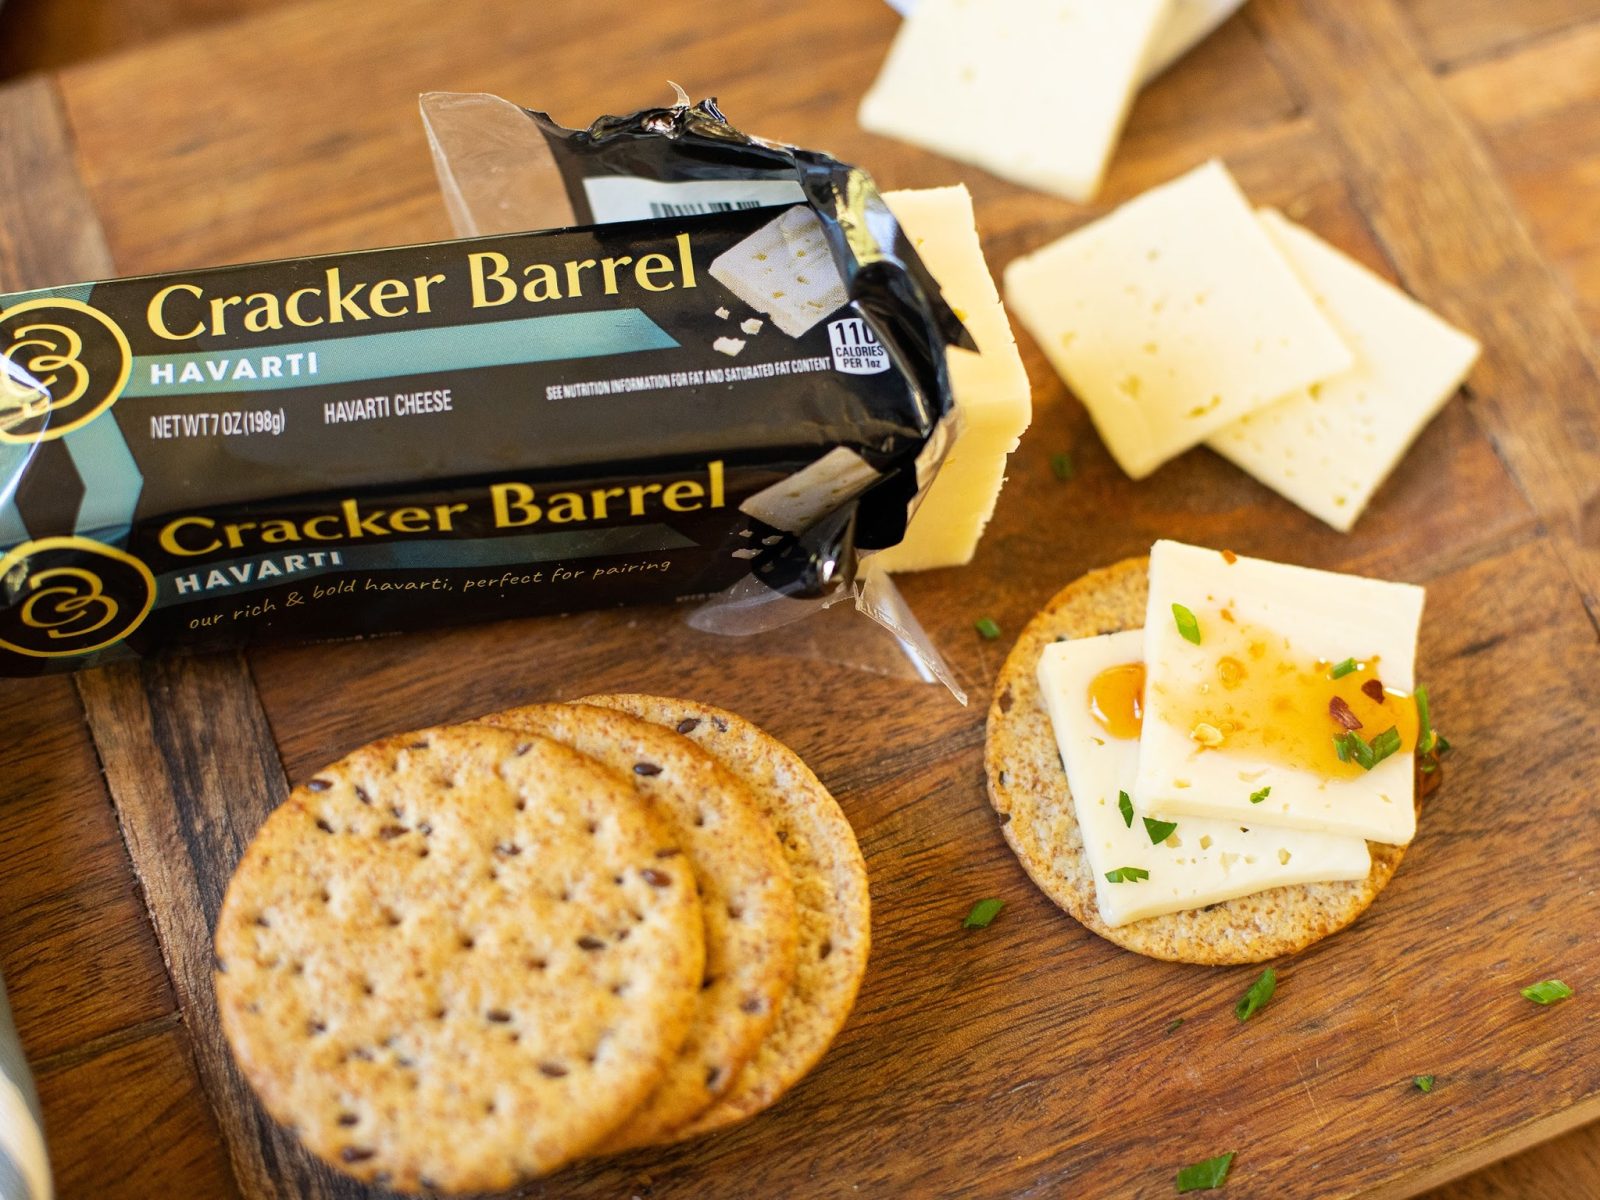 Cracker Barrel Cheese As Low As $2 At Publix